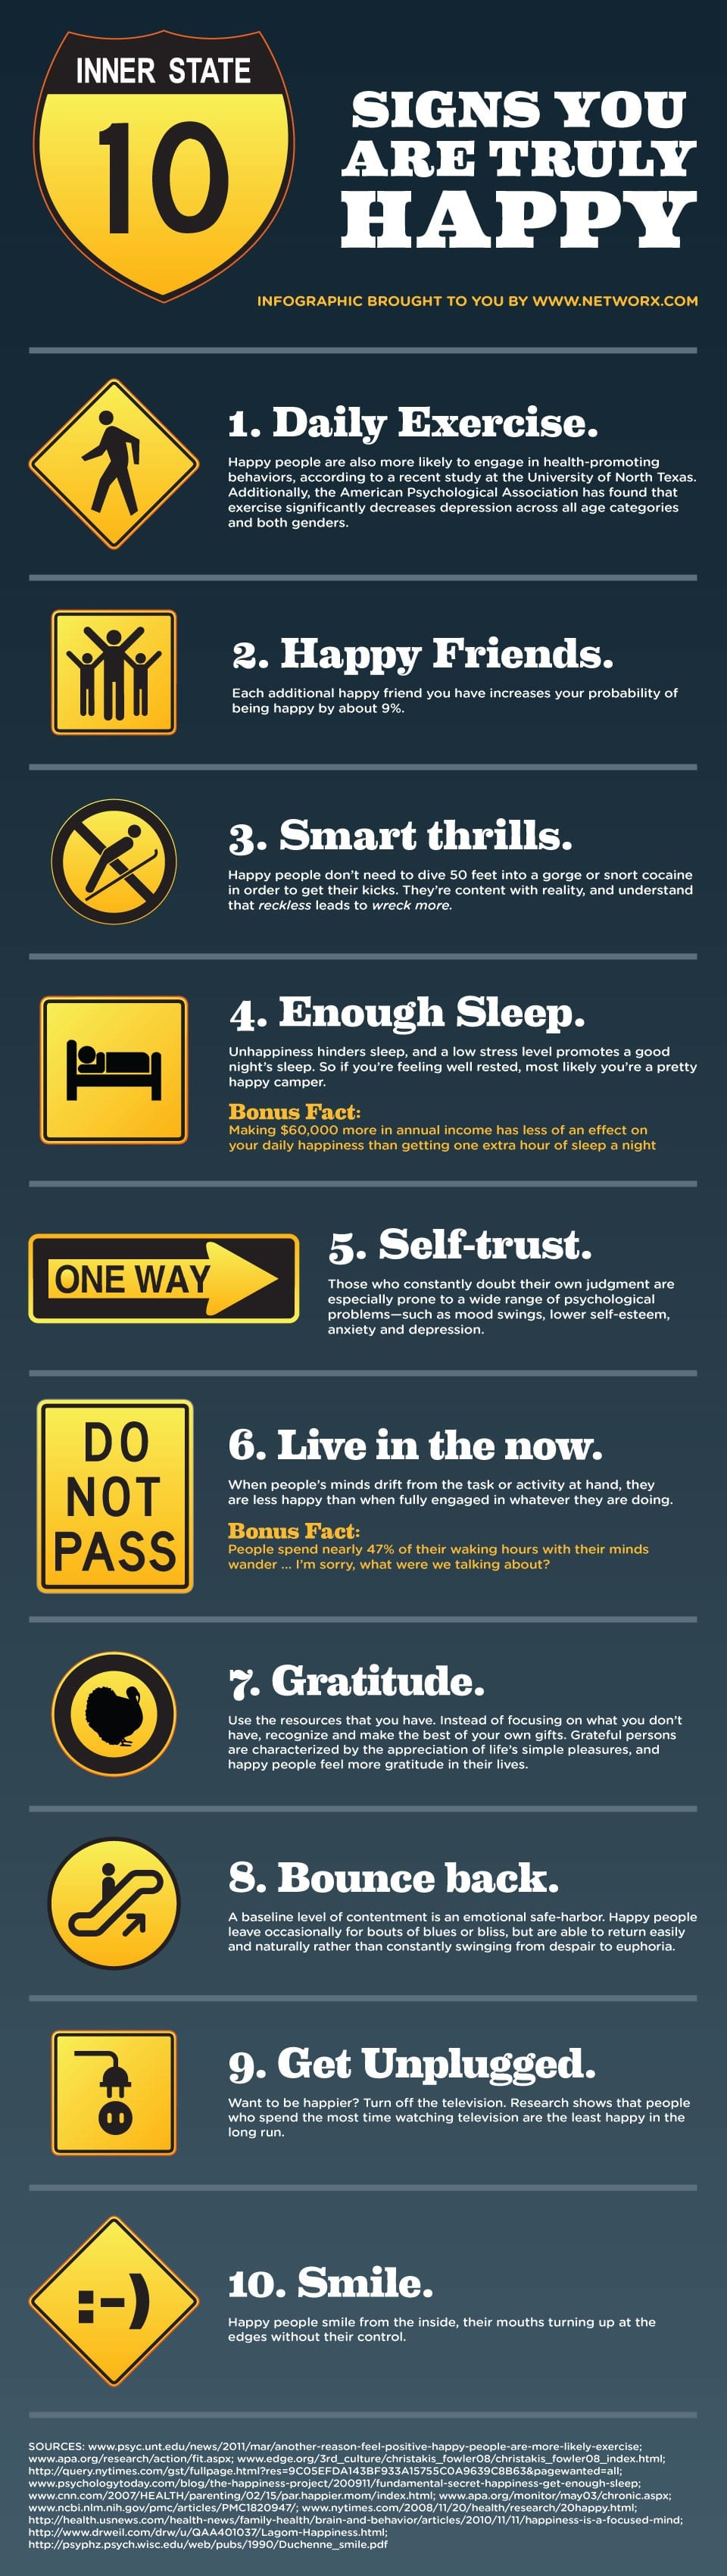 10 Signs You Are Truly Happy [Infographic]